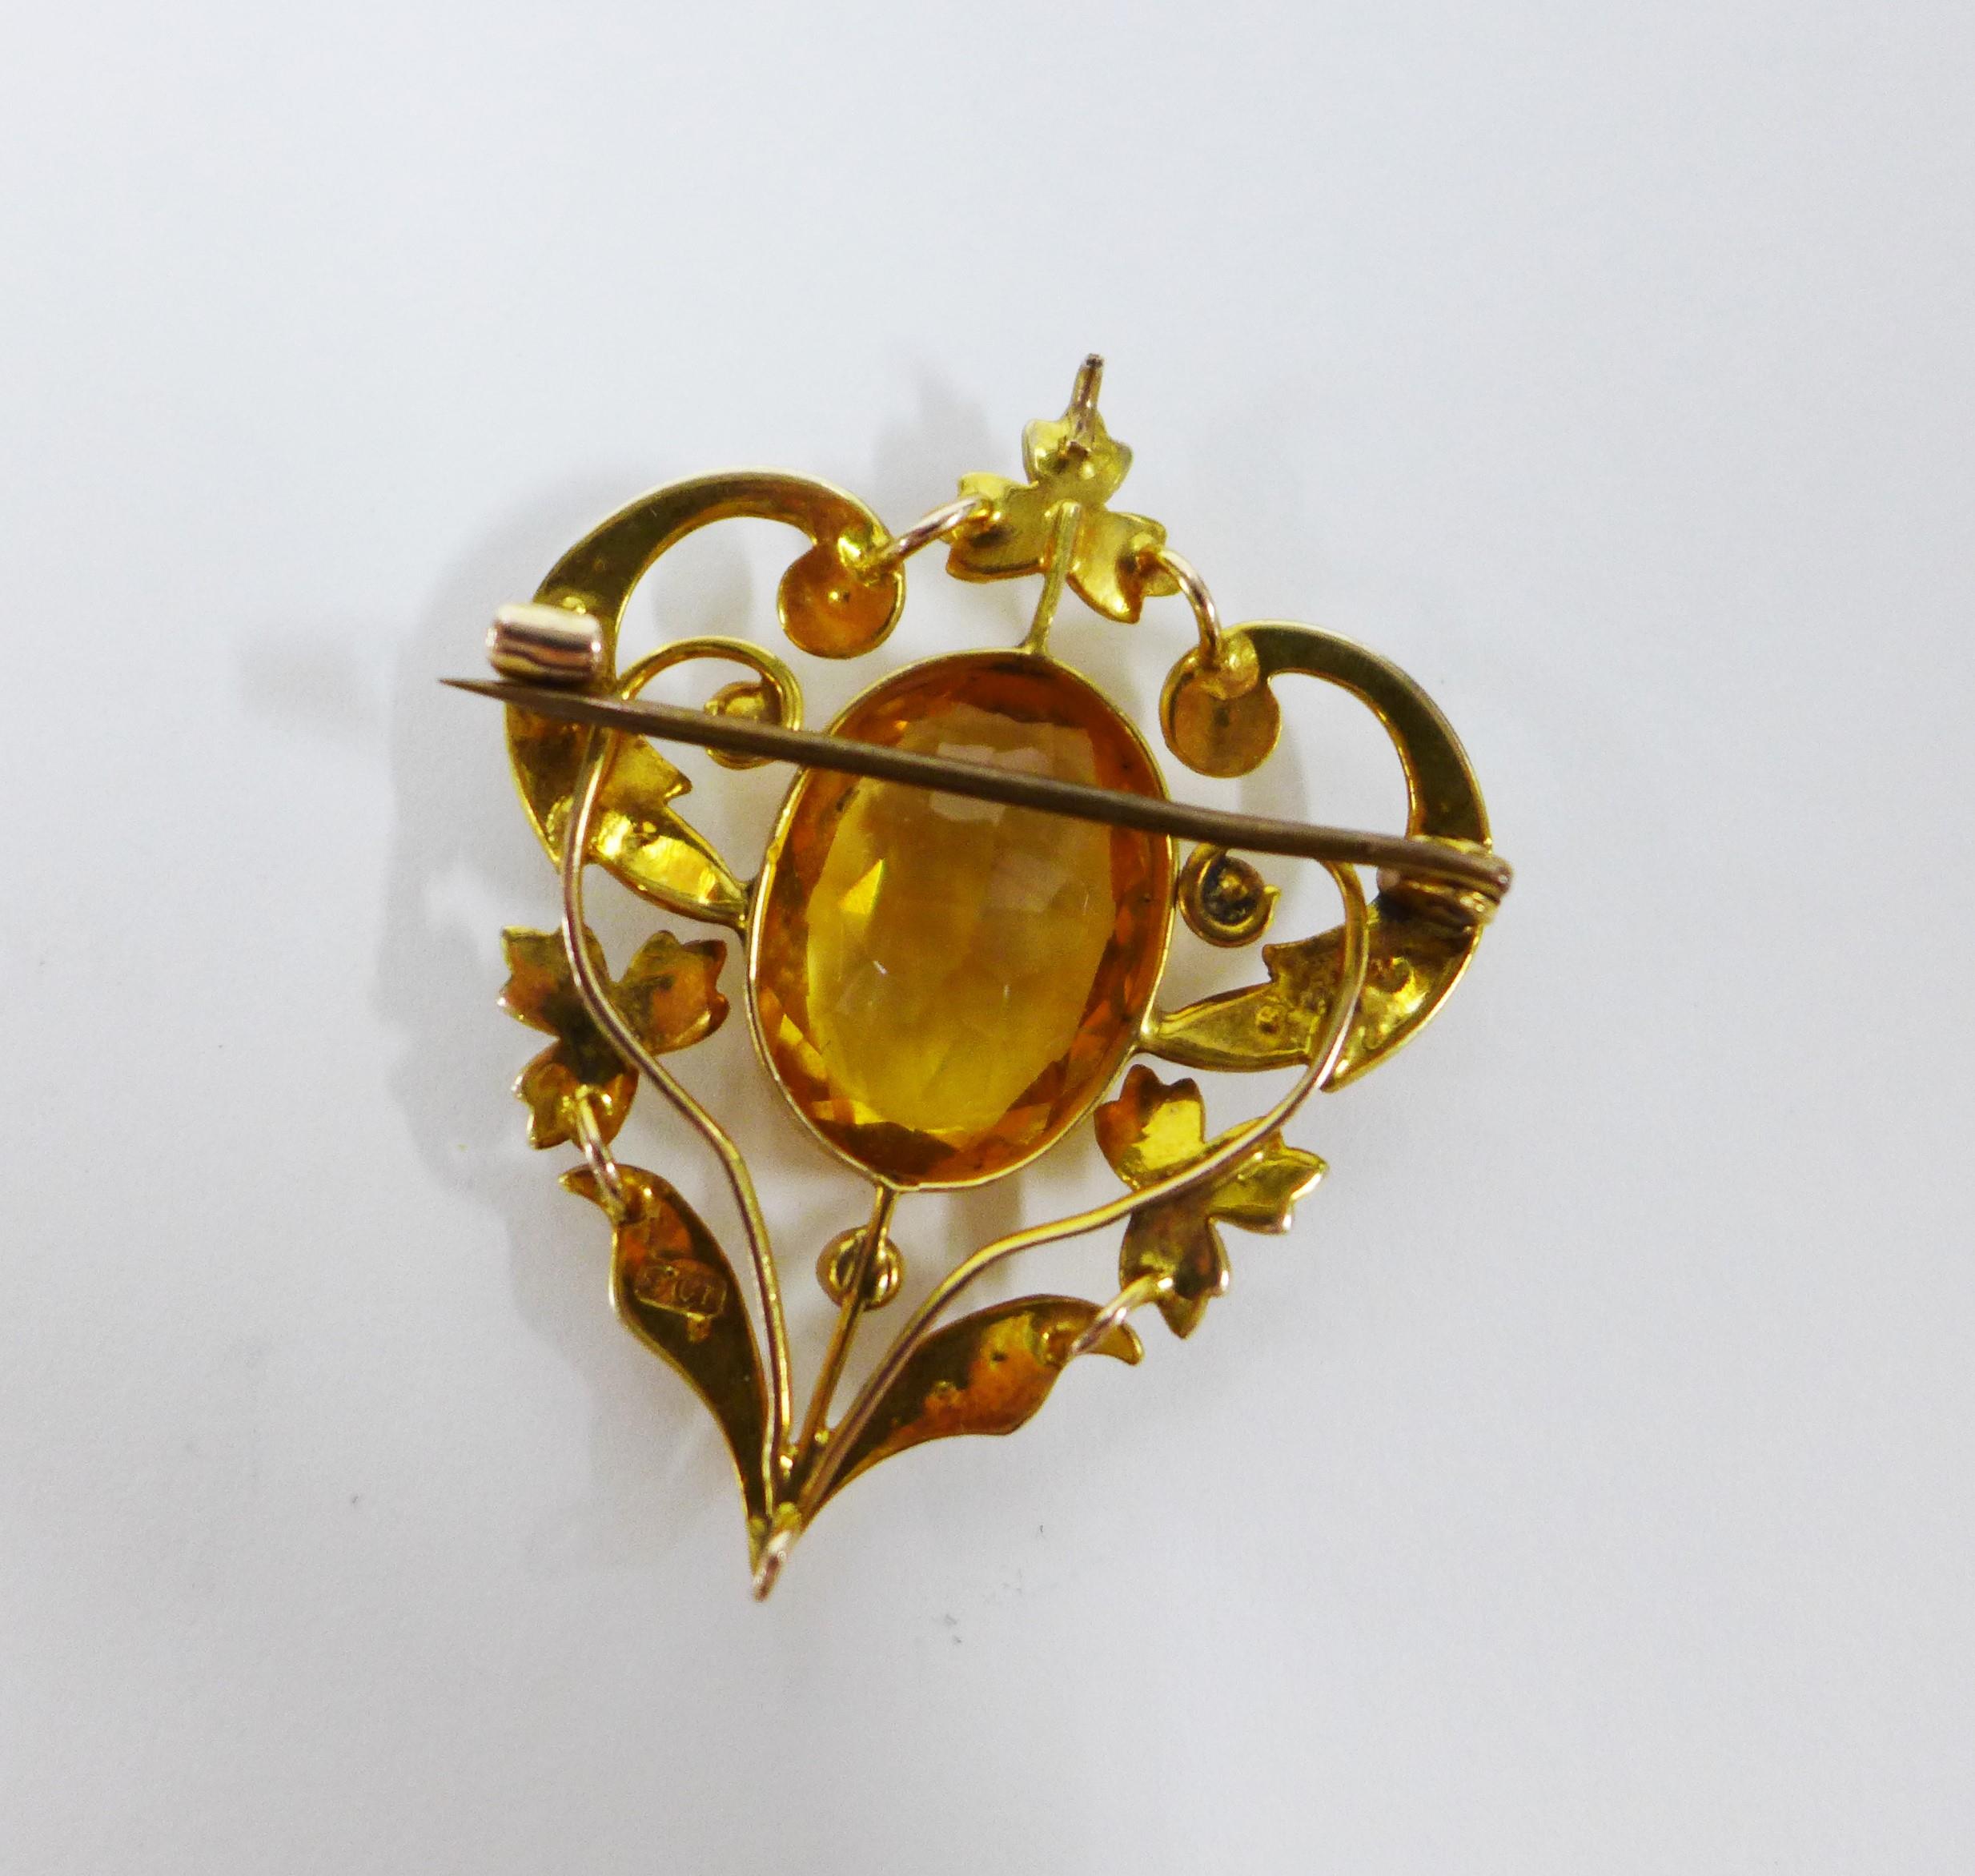 9ct gold seed pearl and citrine brooch, 4cm - Image 2 of 2